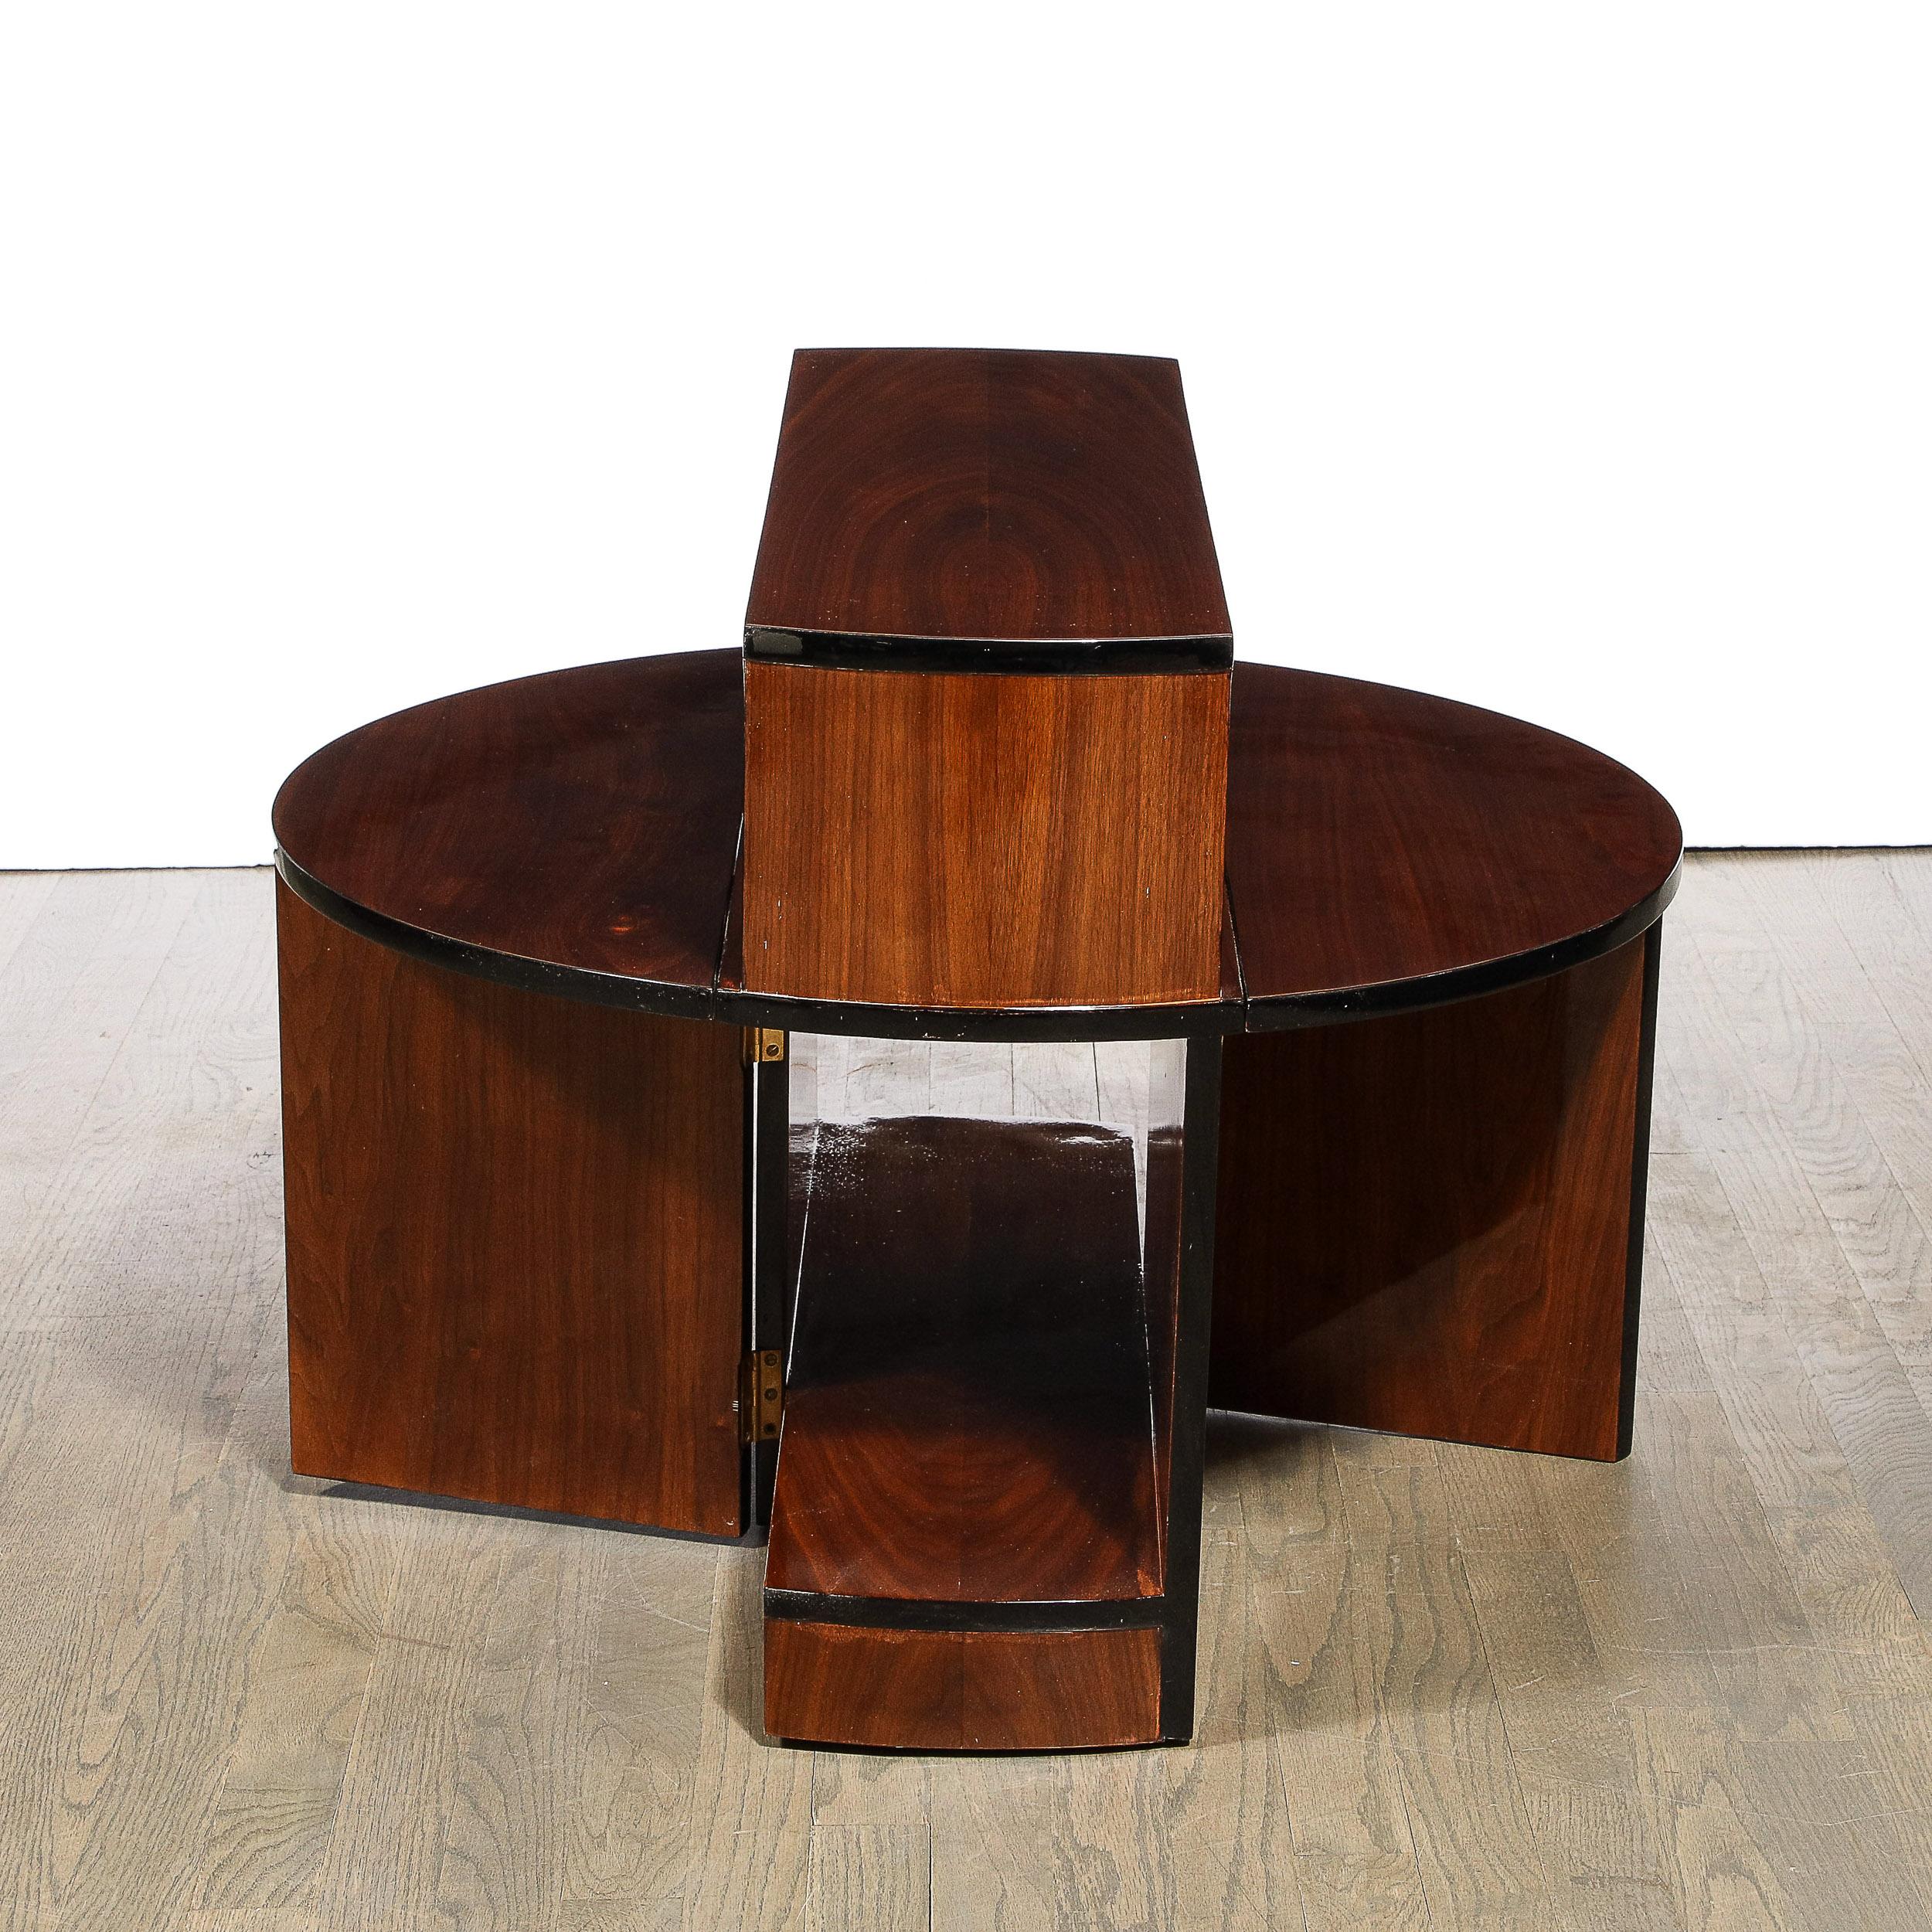 Mid-20th Century Art Deco Machine Age Folding Coffee Table in Book-Matched Walnut & Black Lacquer